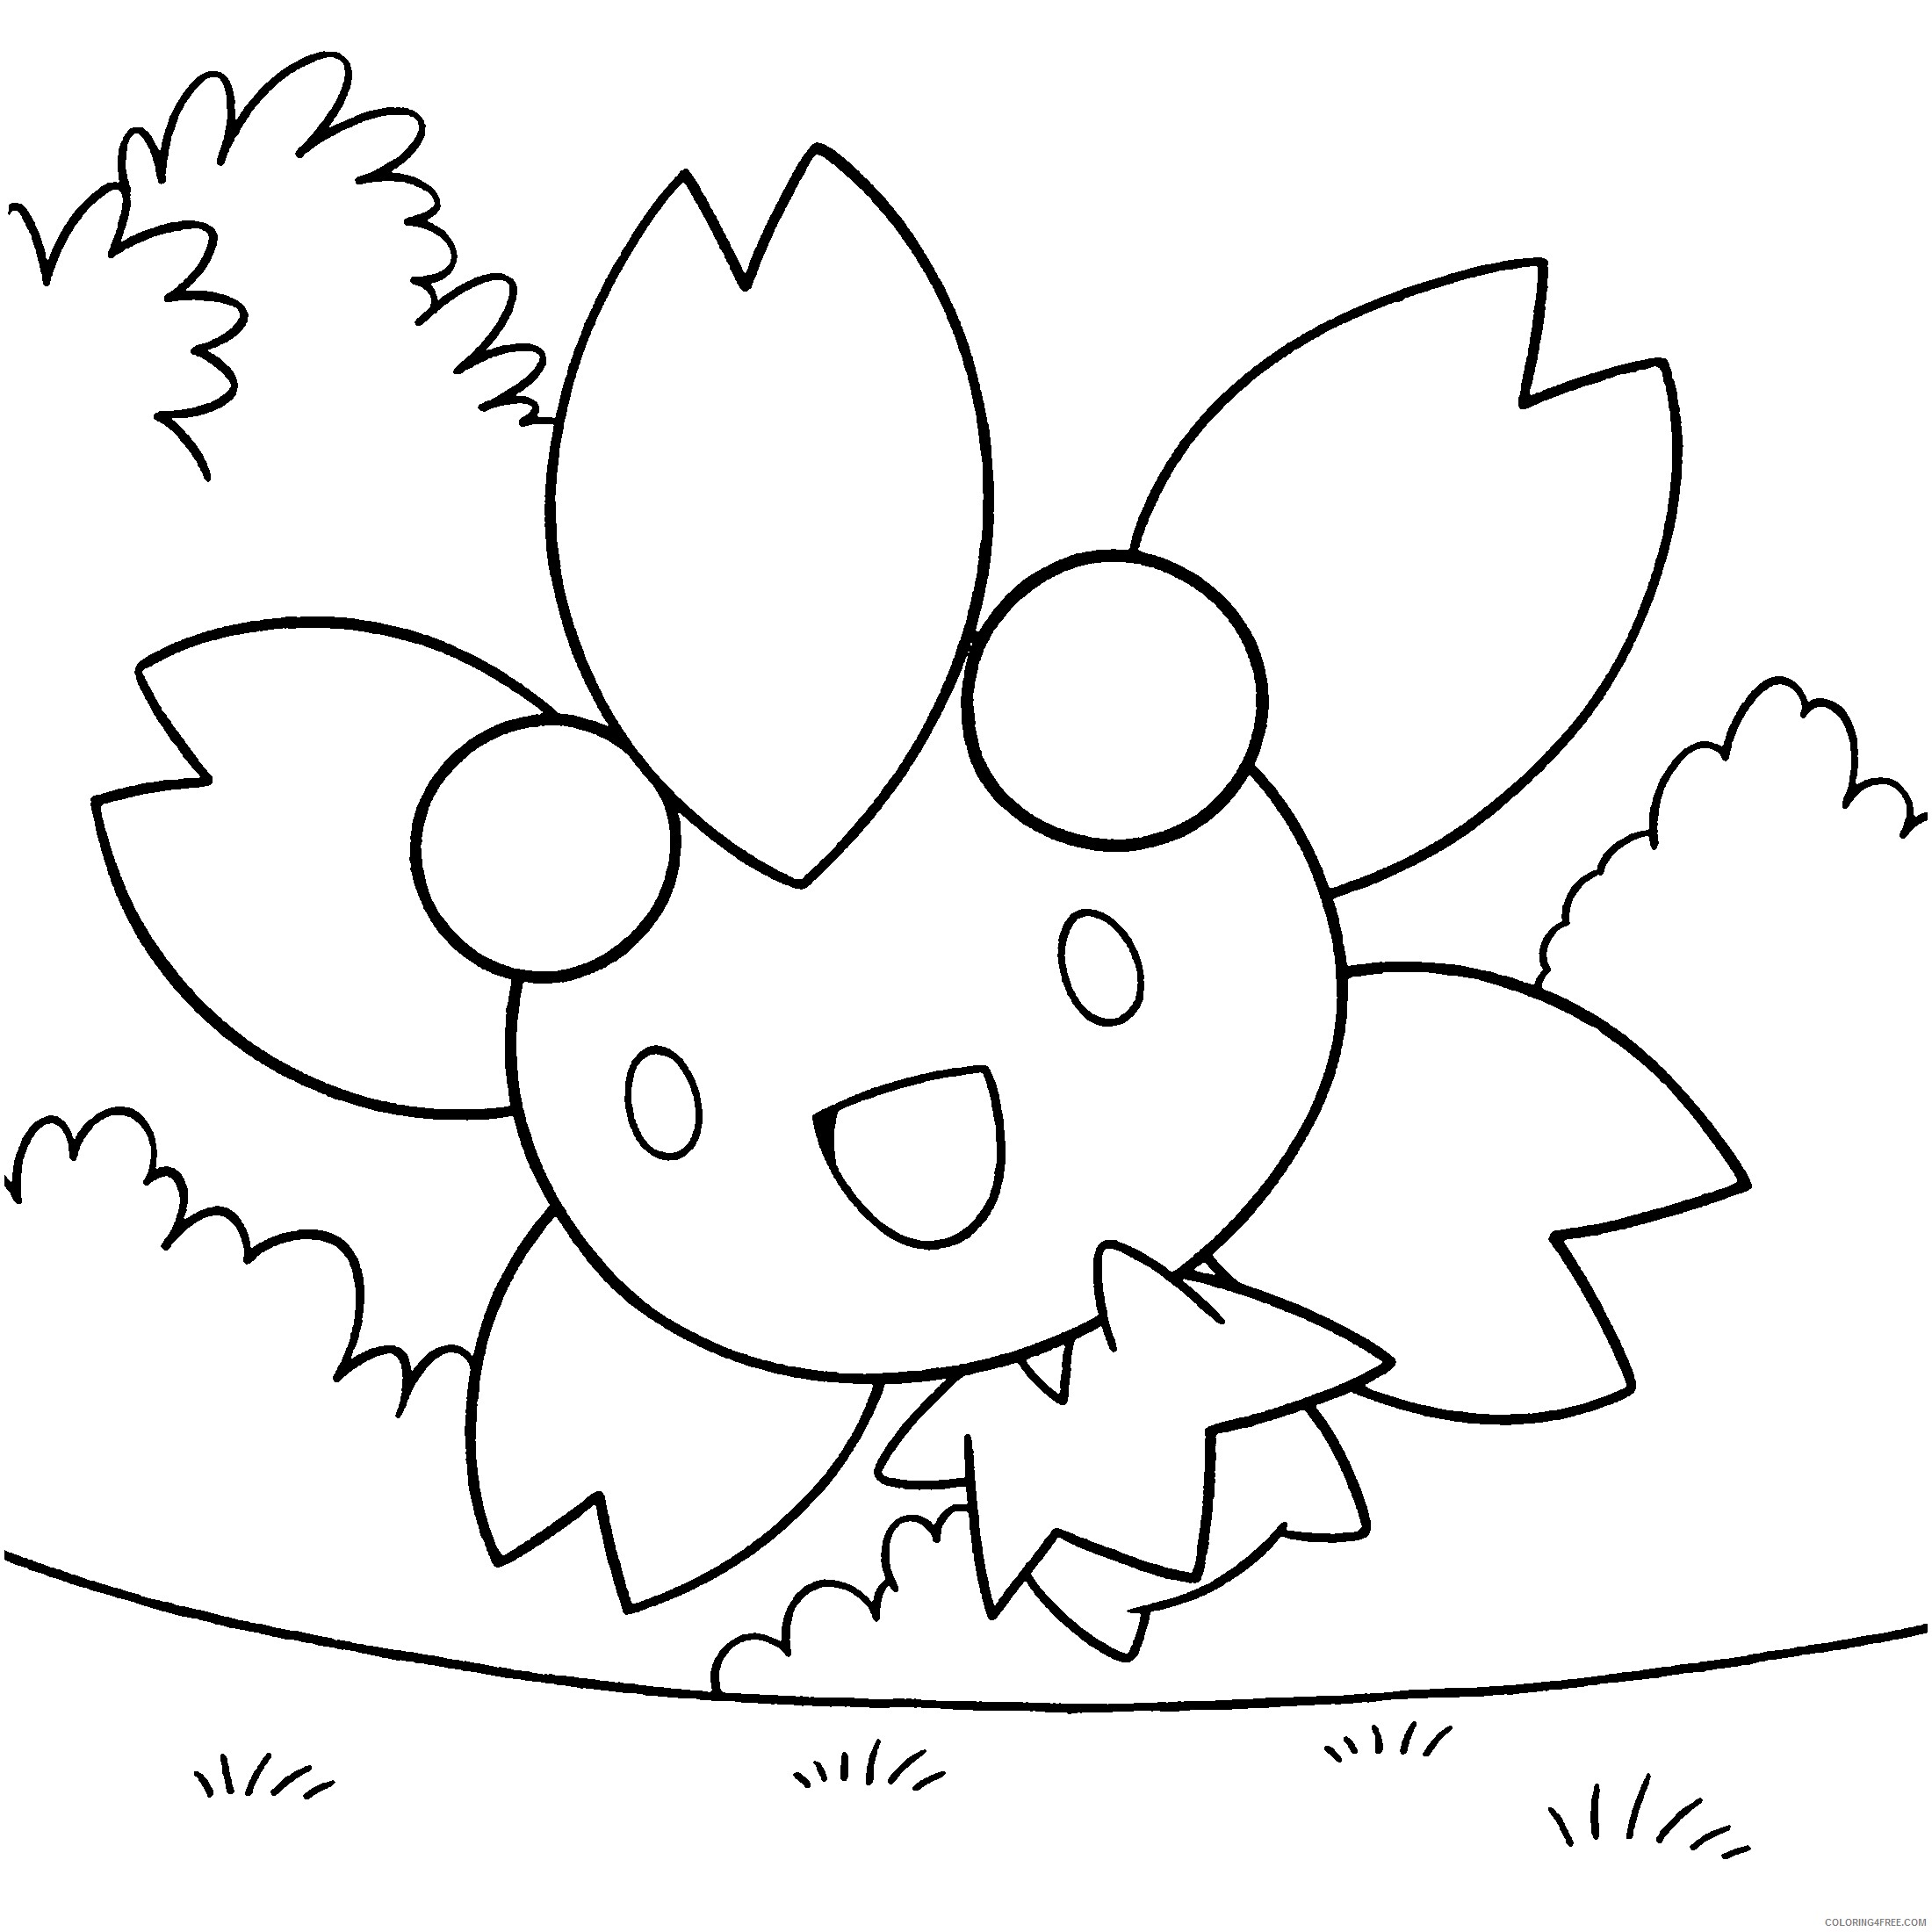 Pokemon Diamond and Pearl Coloring Pages Games Printable 2021 0873 Coloring4free